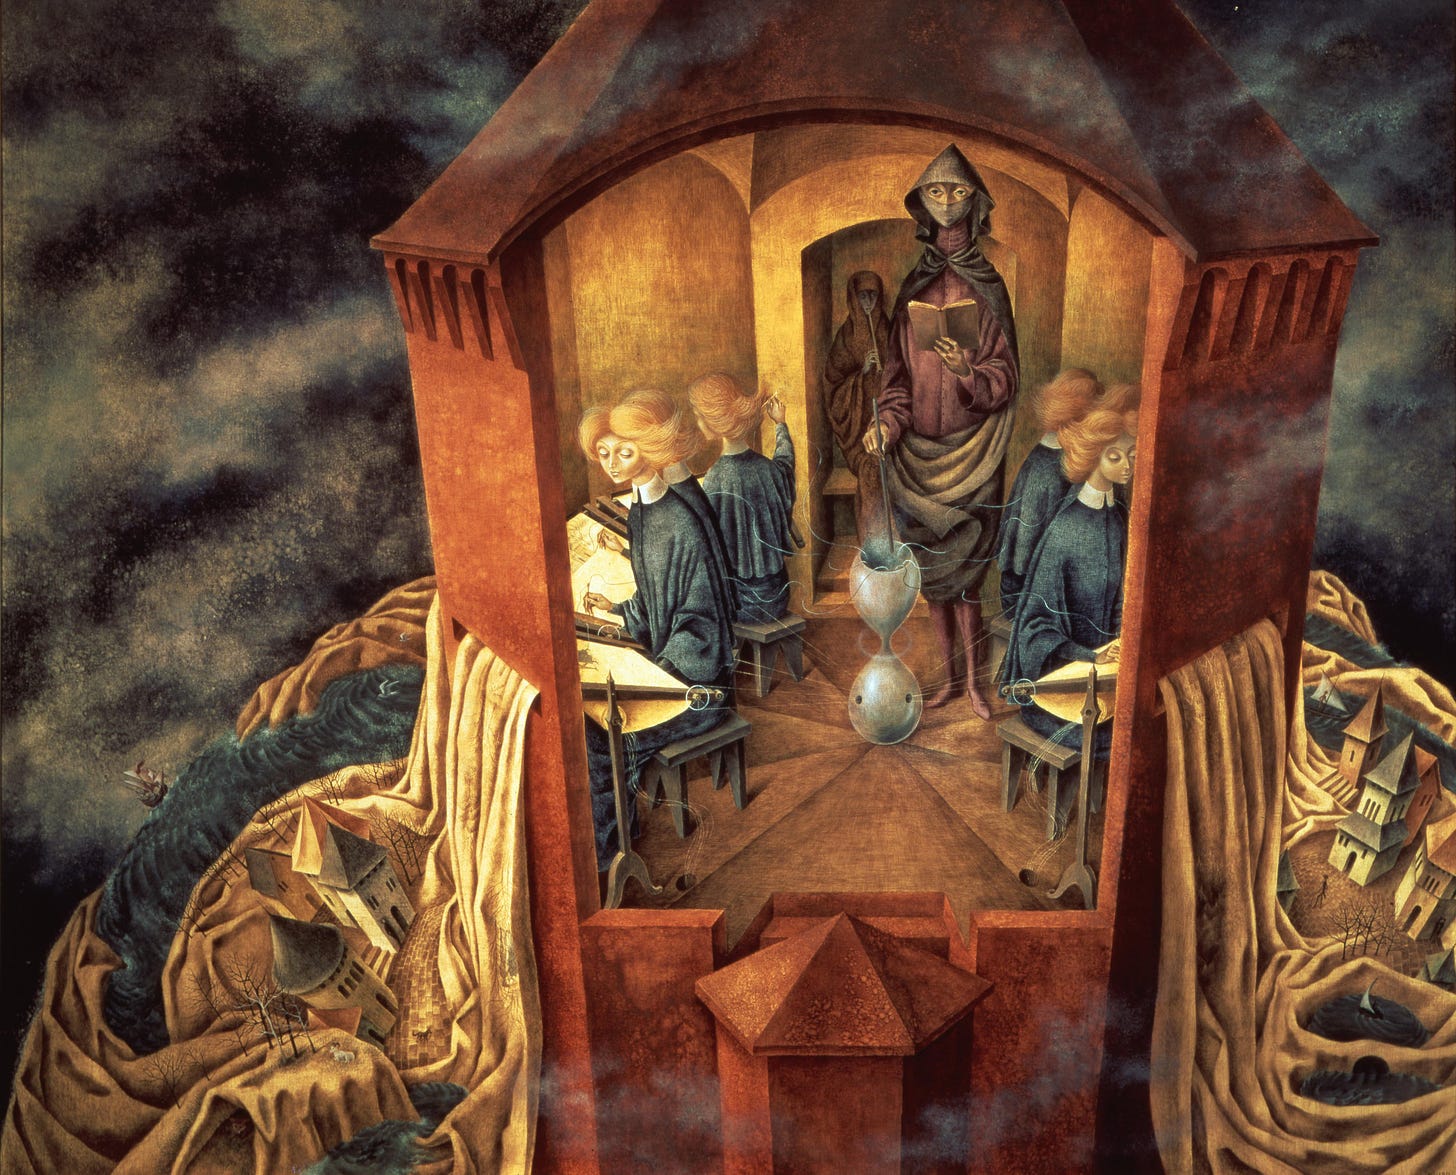 Remedios Varo - The unconscious mind and a horsehair brush